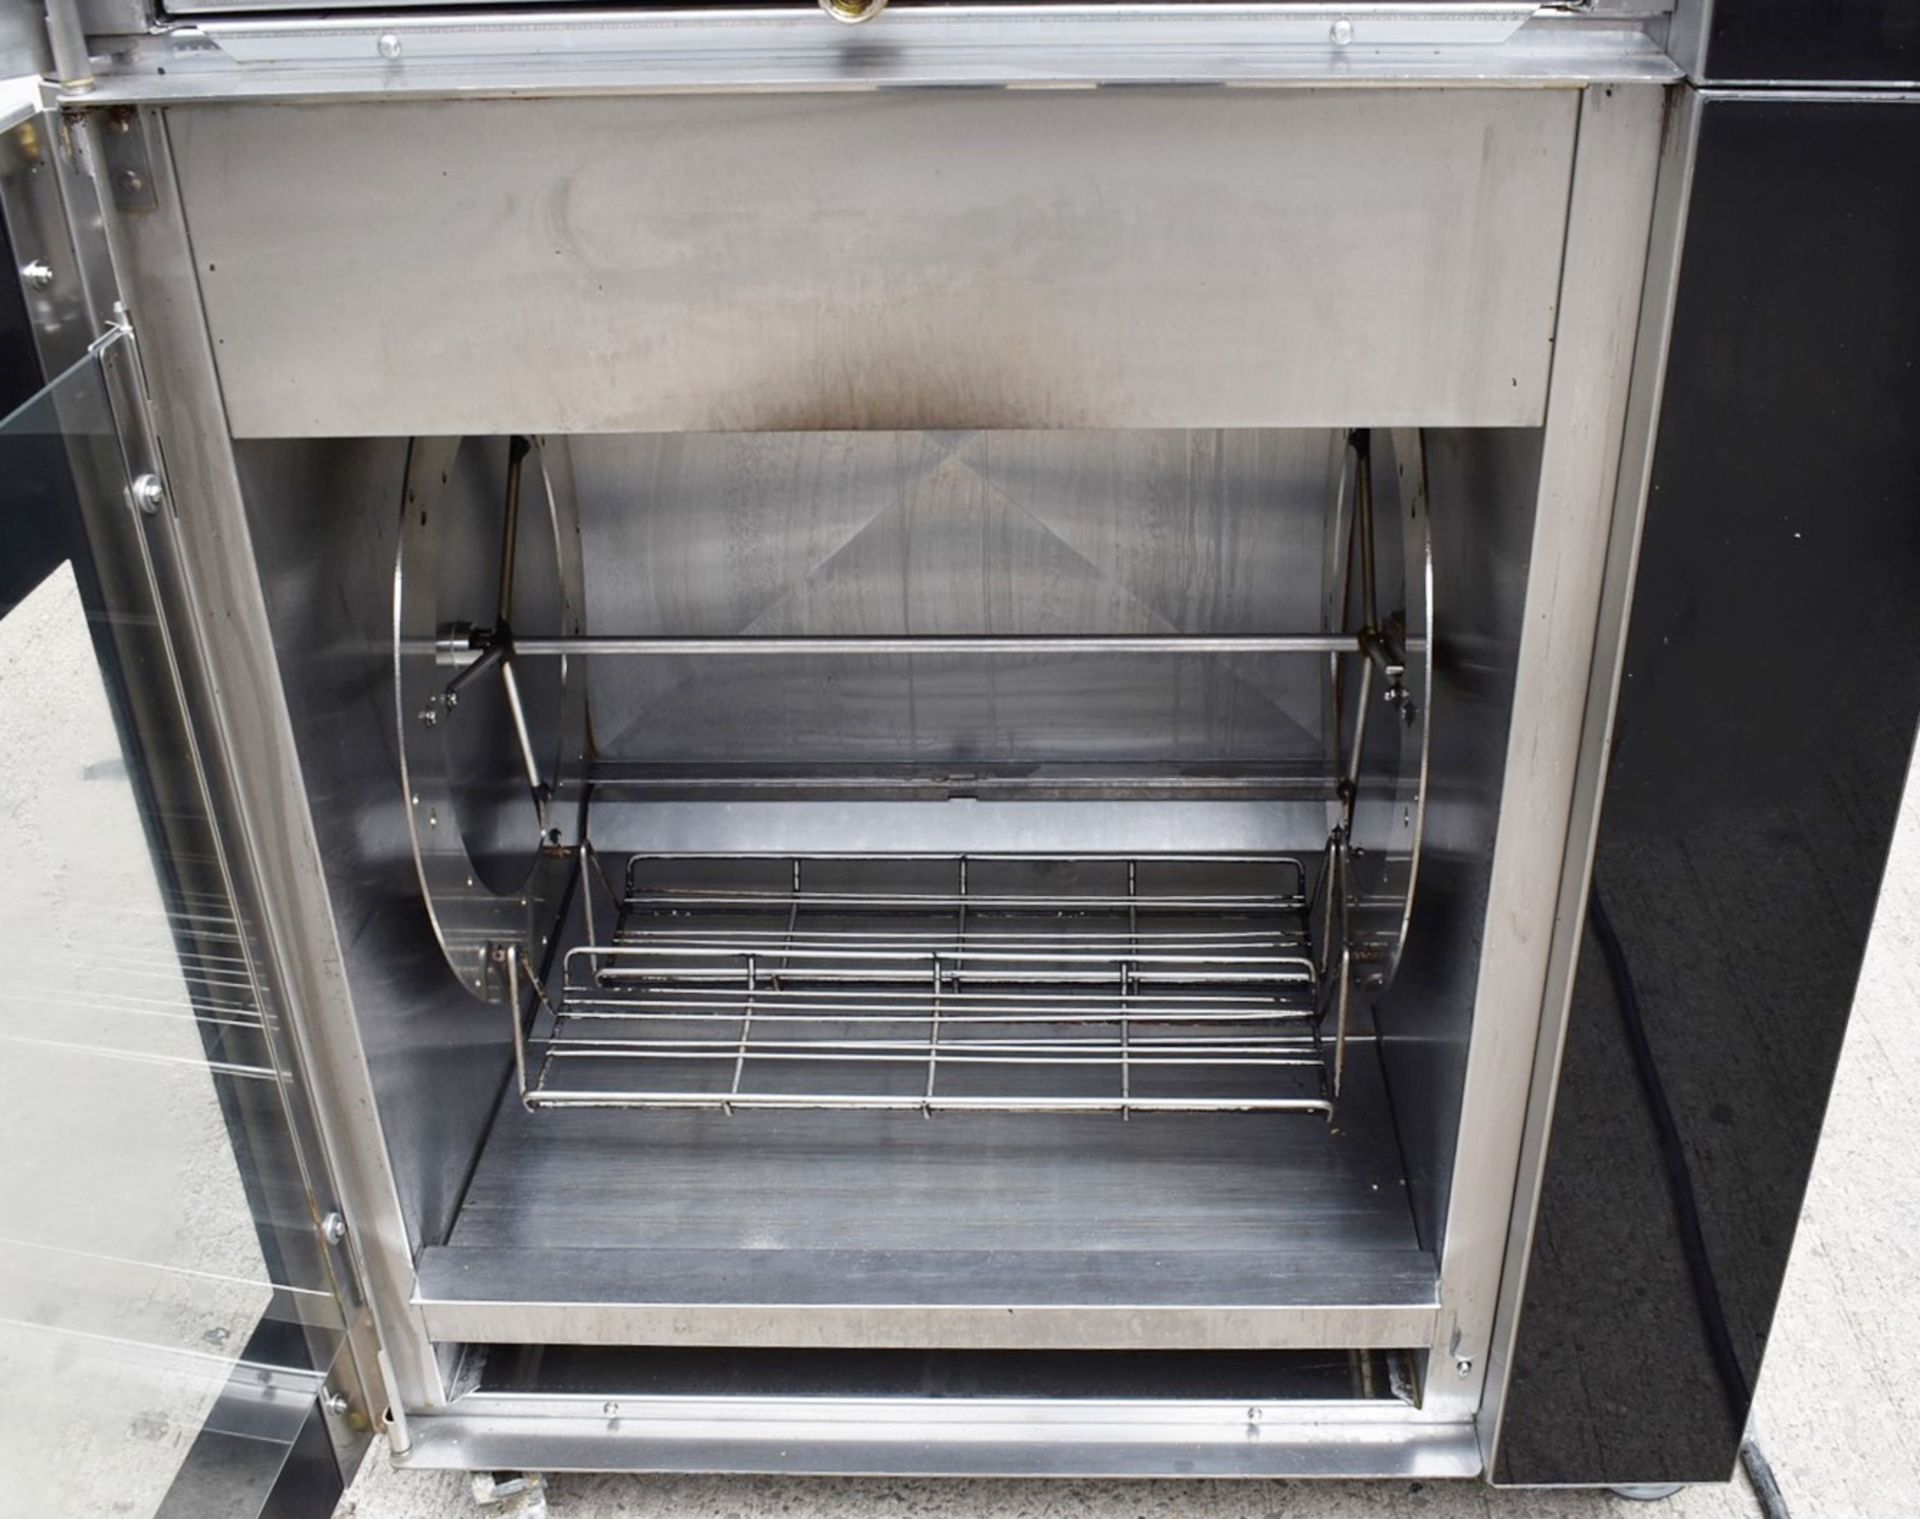 1 x Frijado 80 Chicken Rotisserie Programmable Double Oven - 3 Phase - Model: TDR 8+8P - RRP £21,000 - Image 16 of 17